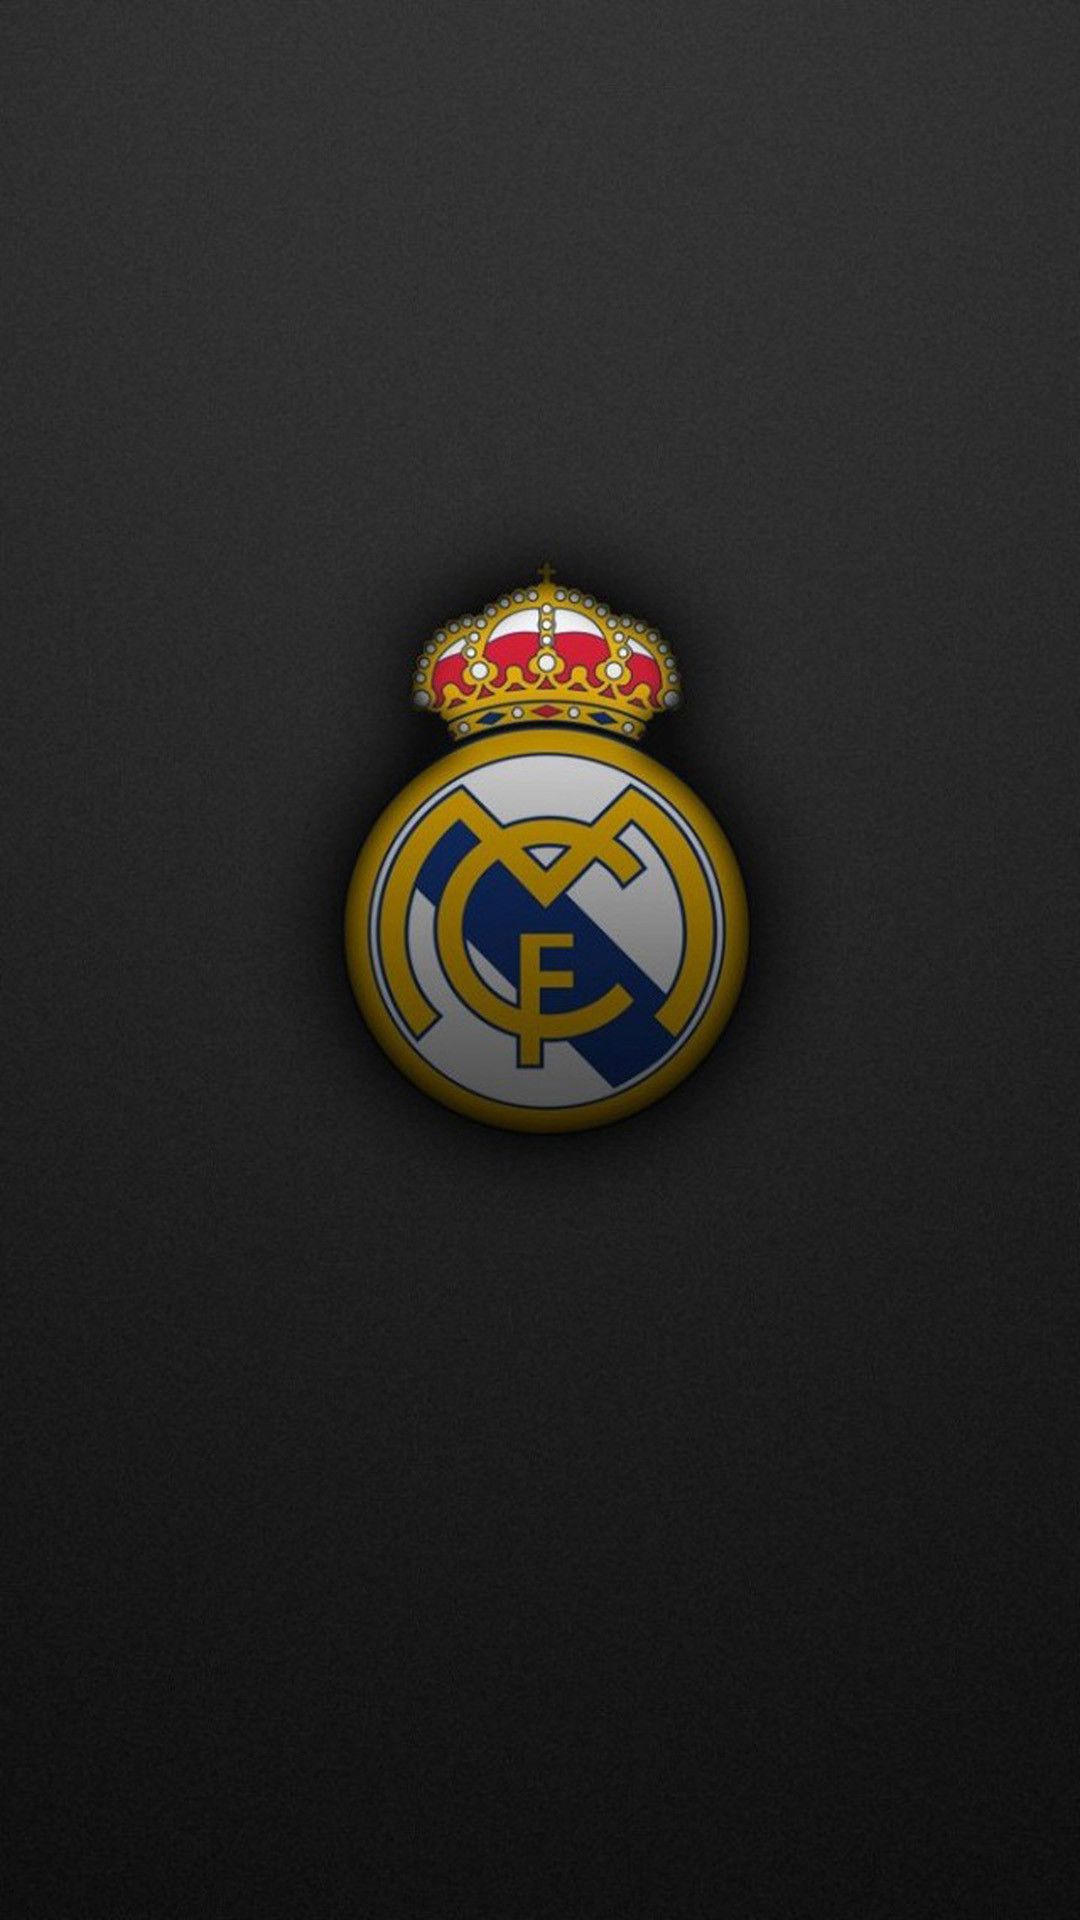 Real Madrid Wallpapers For Iphone 7, Iphone 7 Plus,